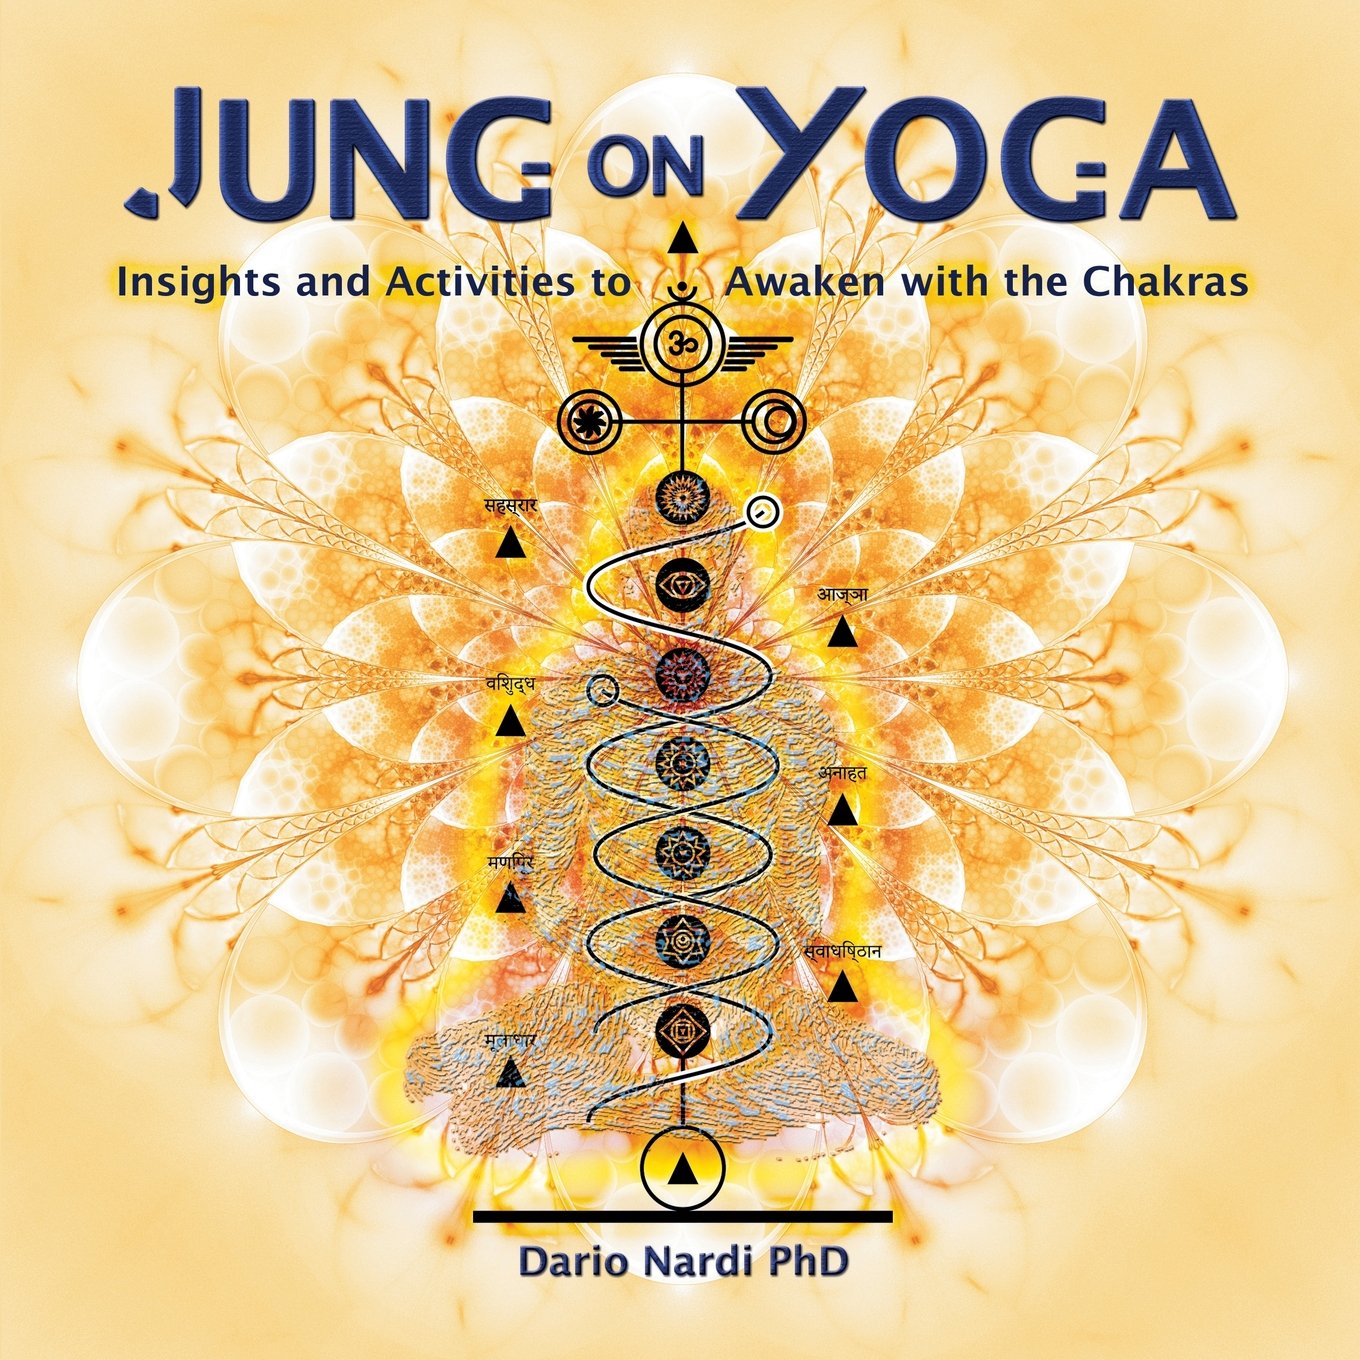 Jung on Yoga: Insights and Activities to Awaken with the Chakras (Copy) (Copy)